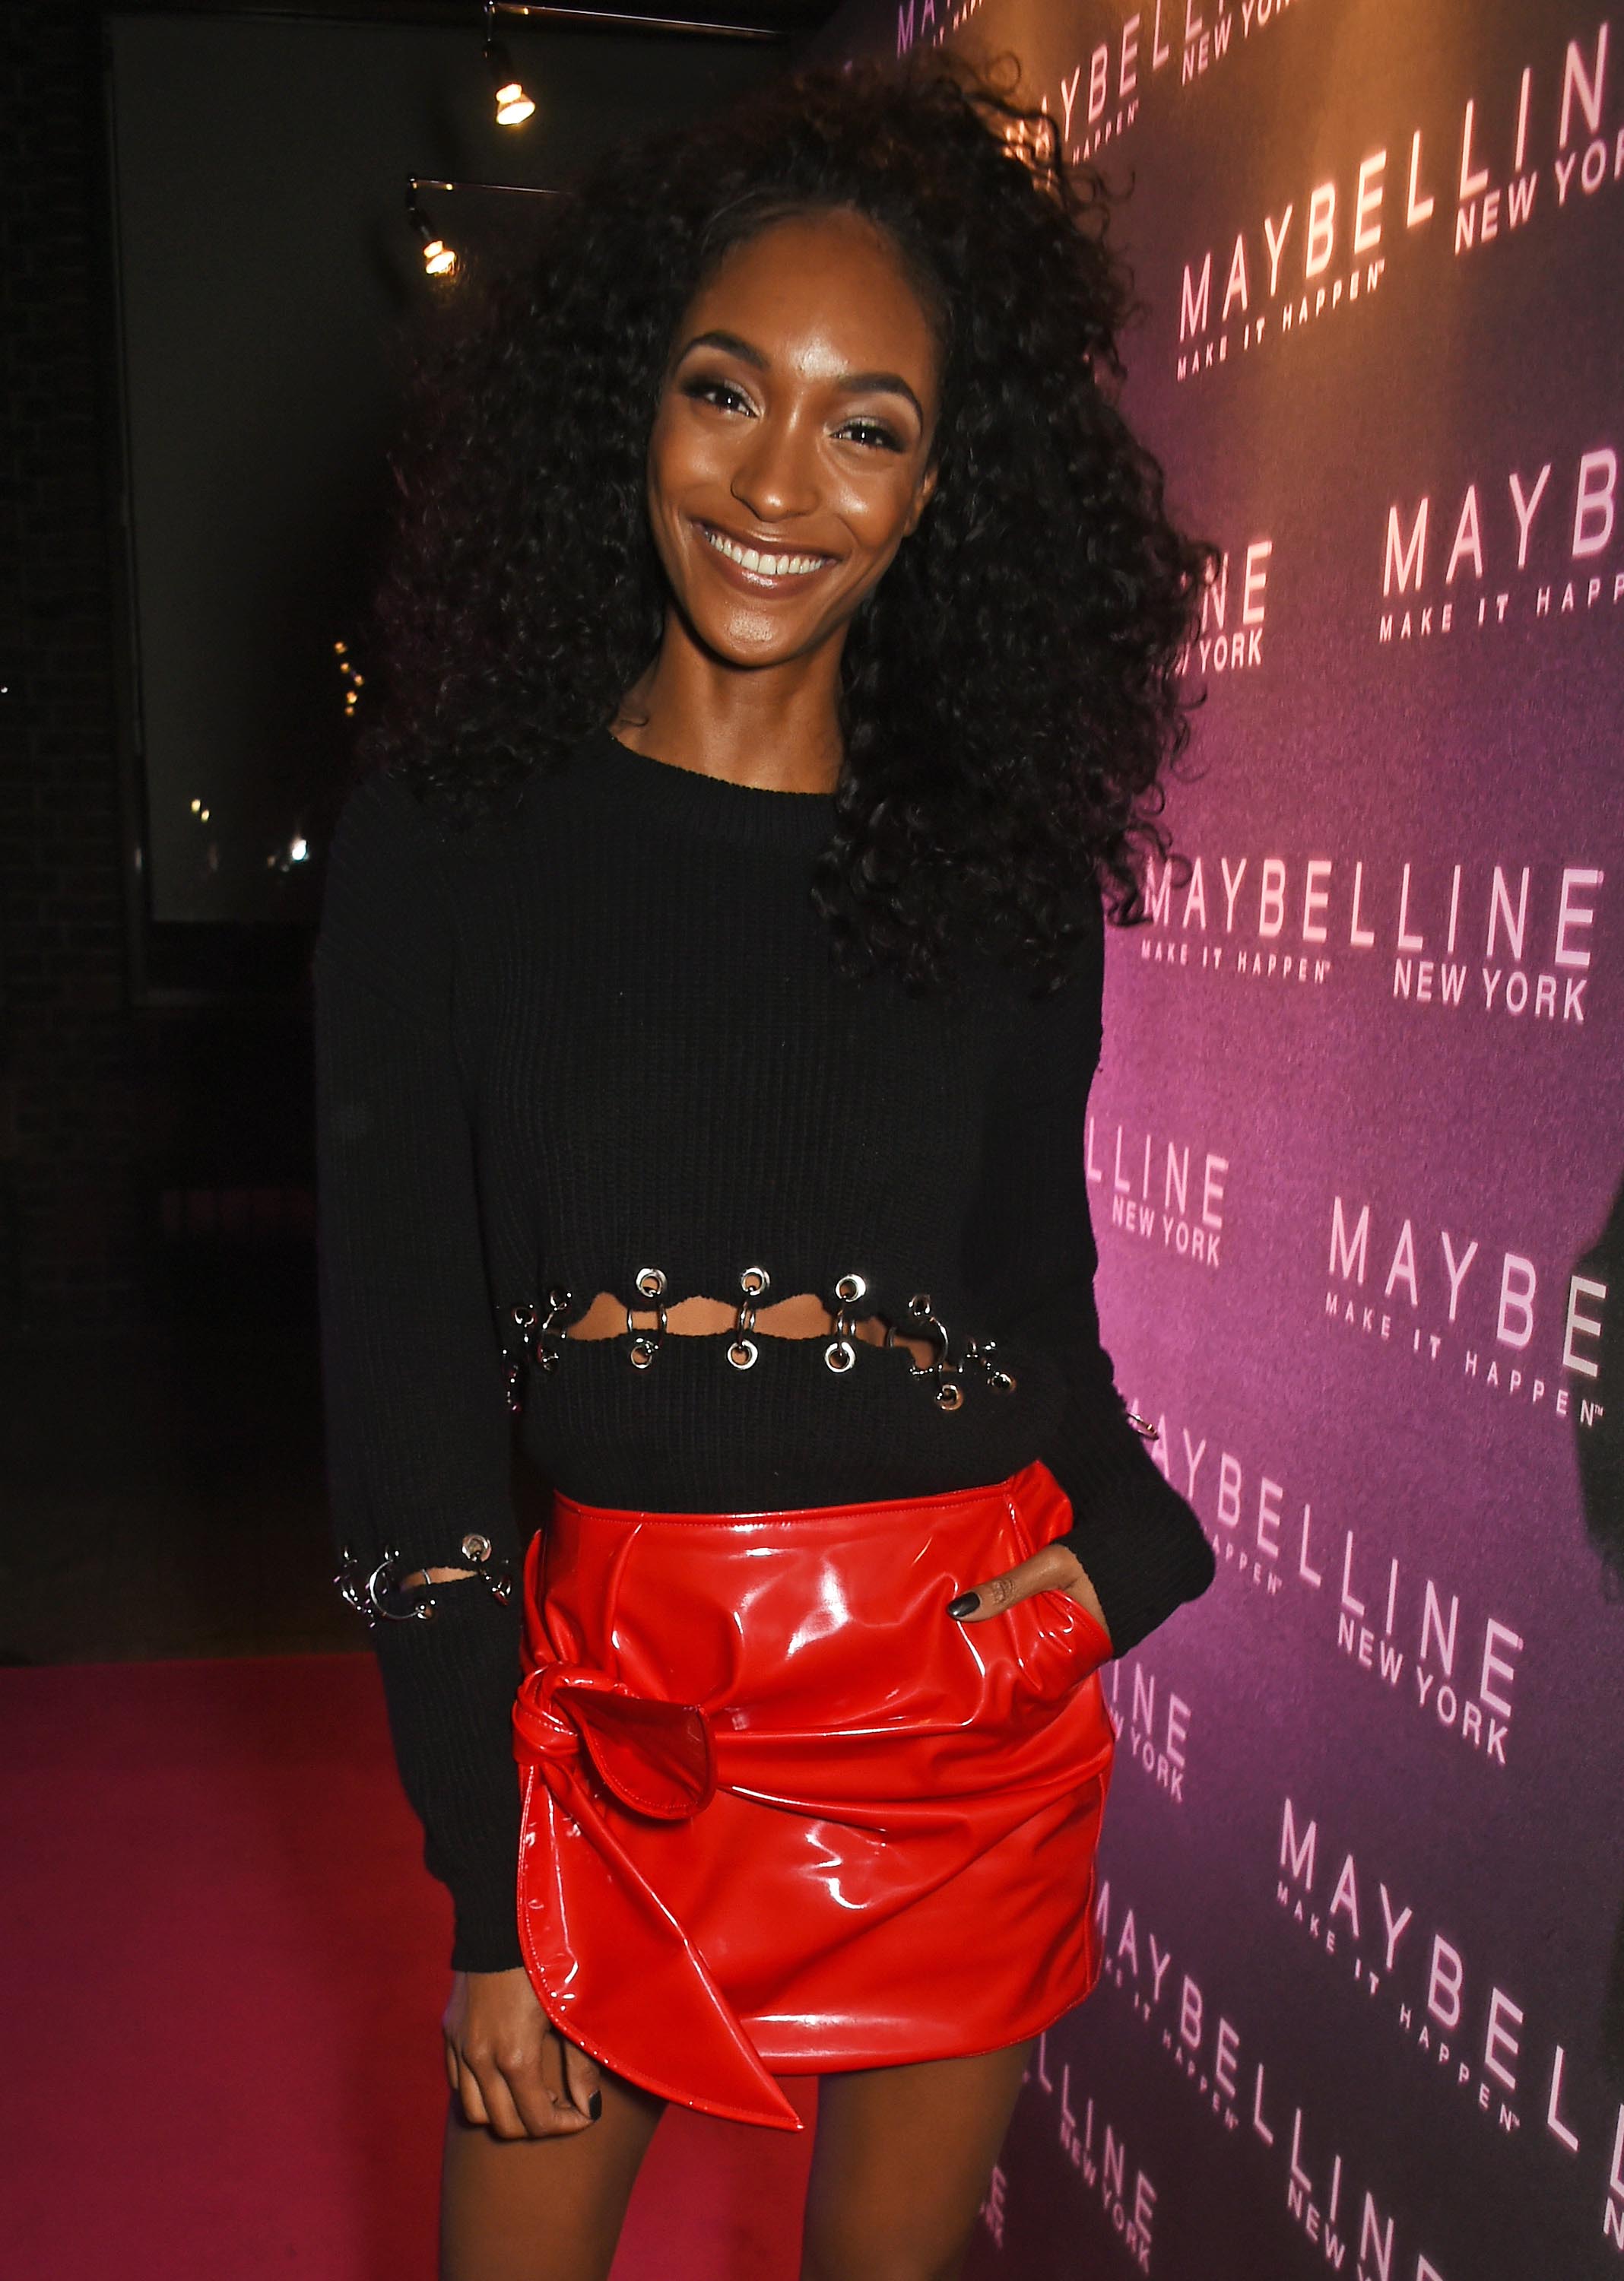 Jourdan Dunn attends Maybelline’s Bring On The Night Party